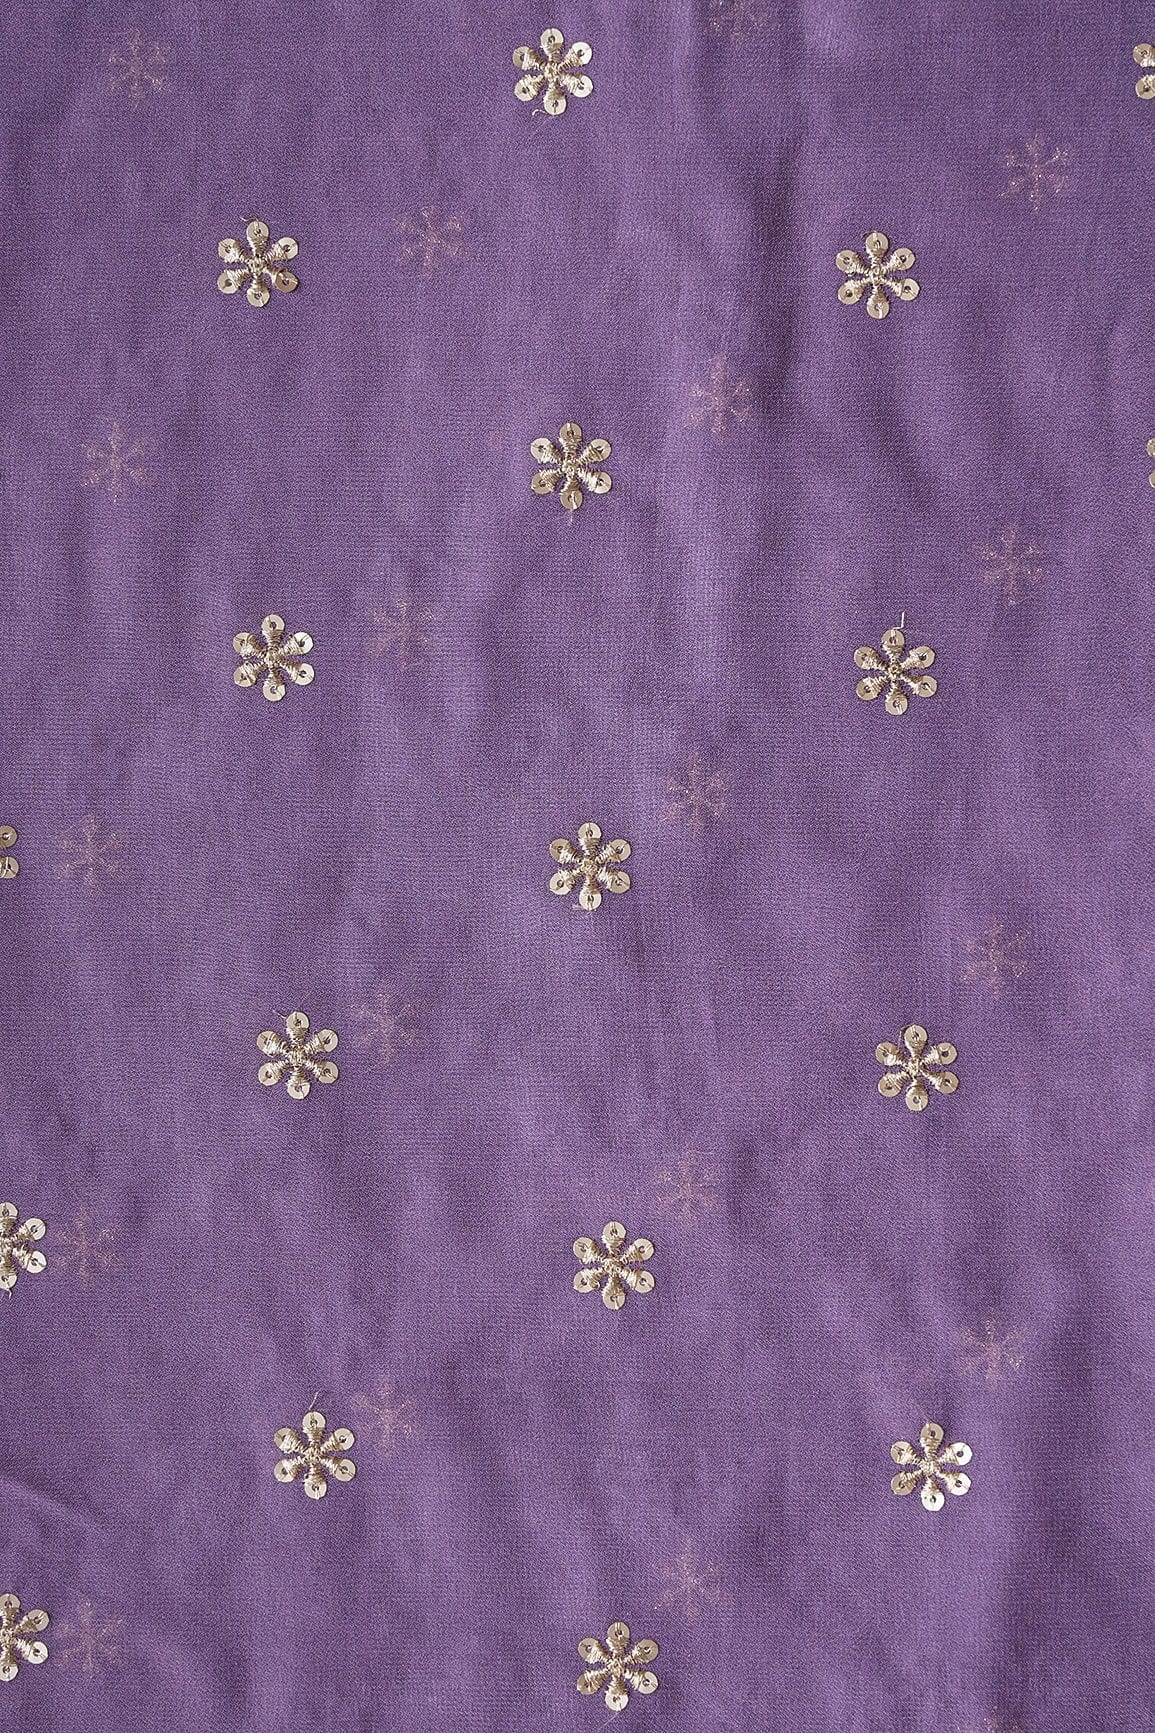 doeraa Embroidery Fabrics Gold Sequins With Gold Zari Beautiful Small Motif Embroidery On Viola Purple Viscose Georgette Fabric